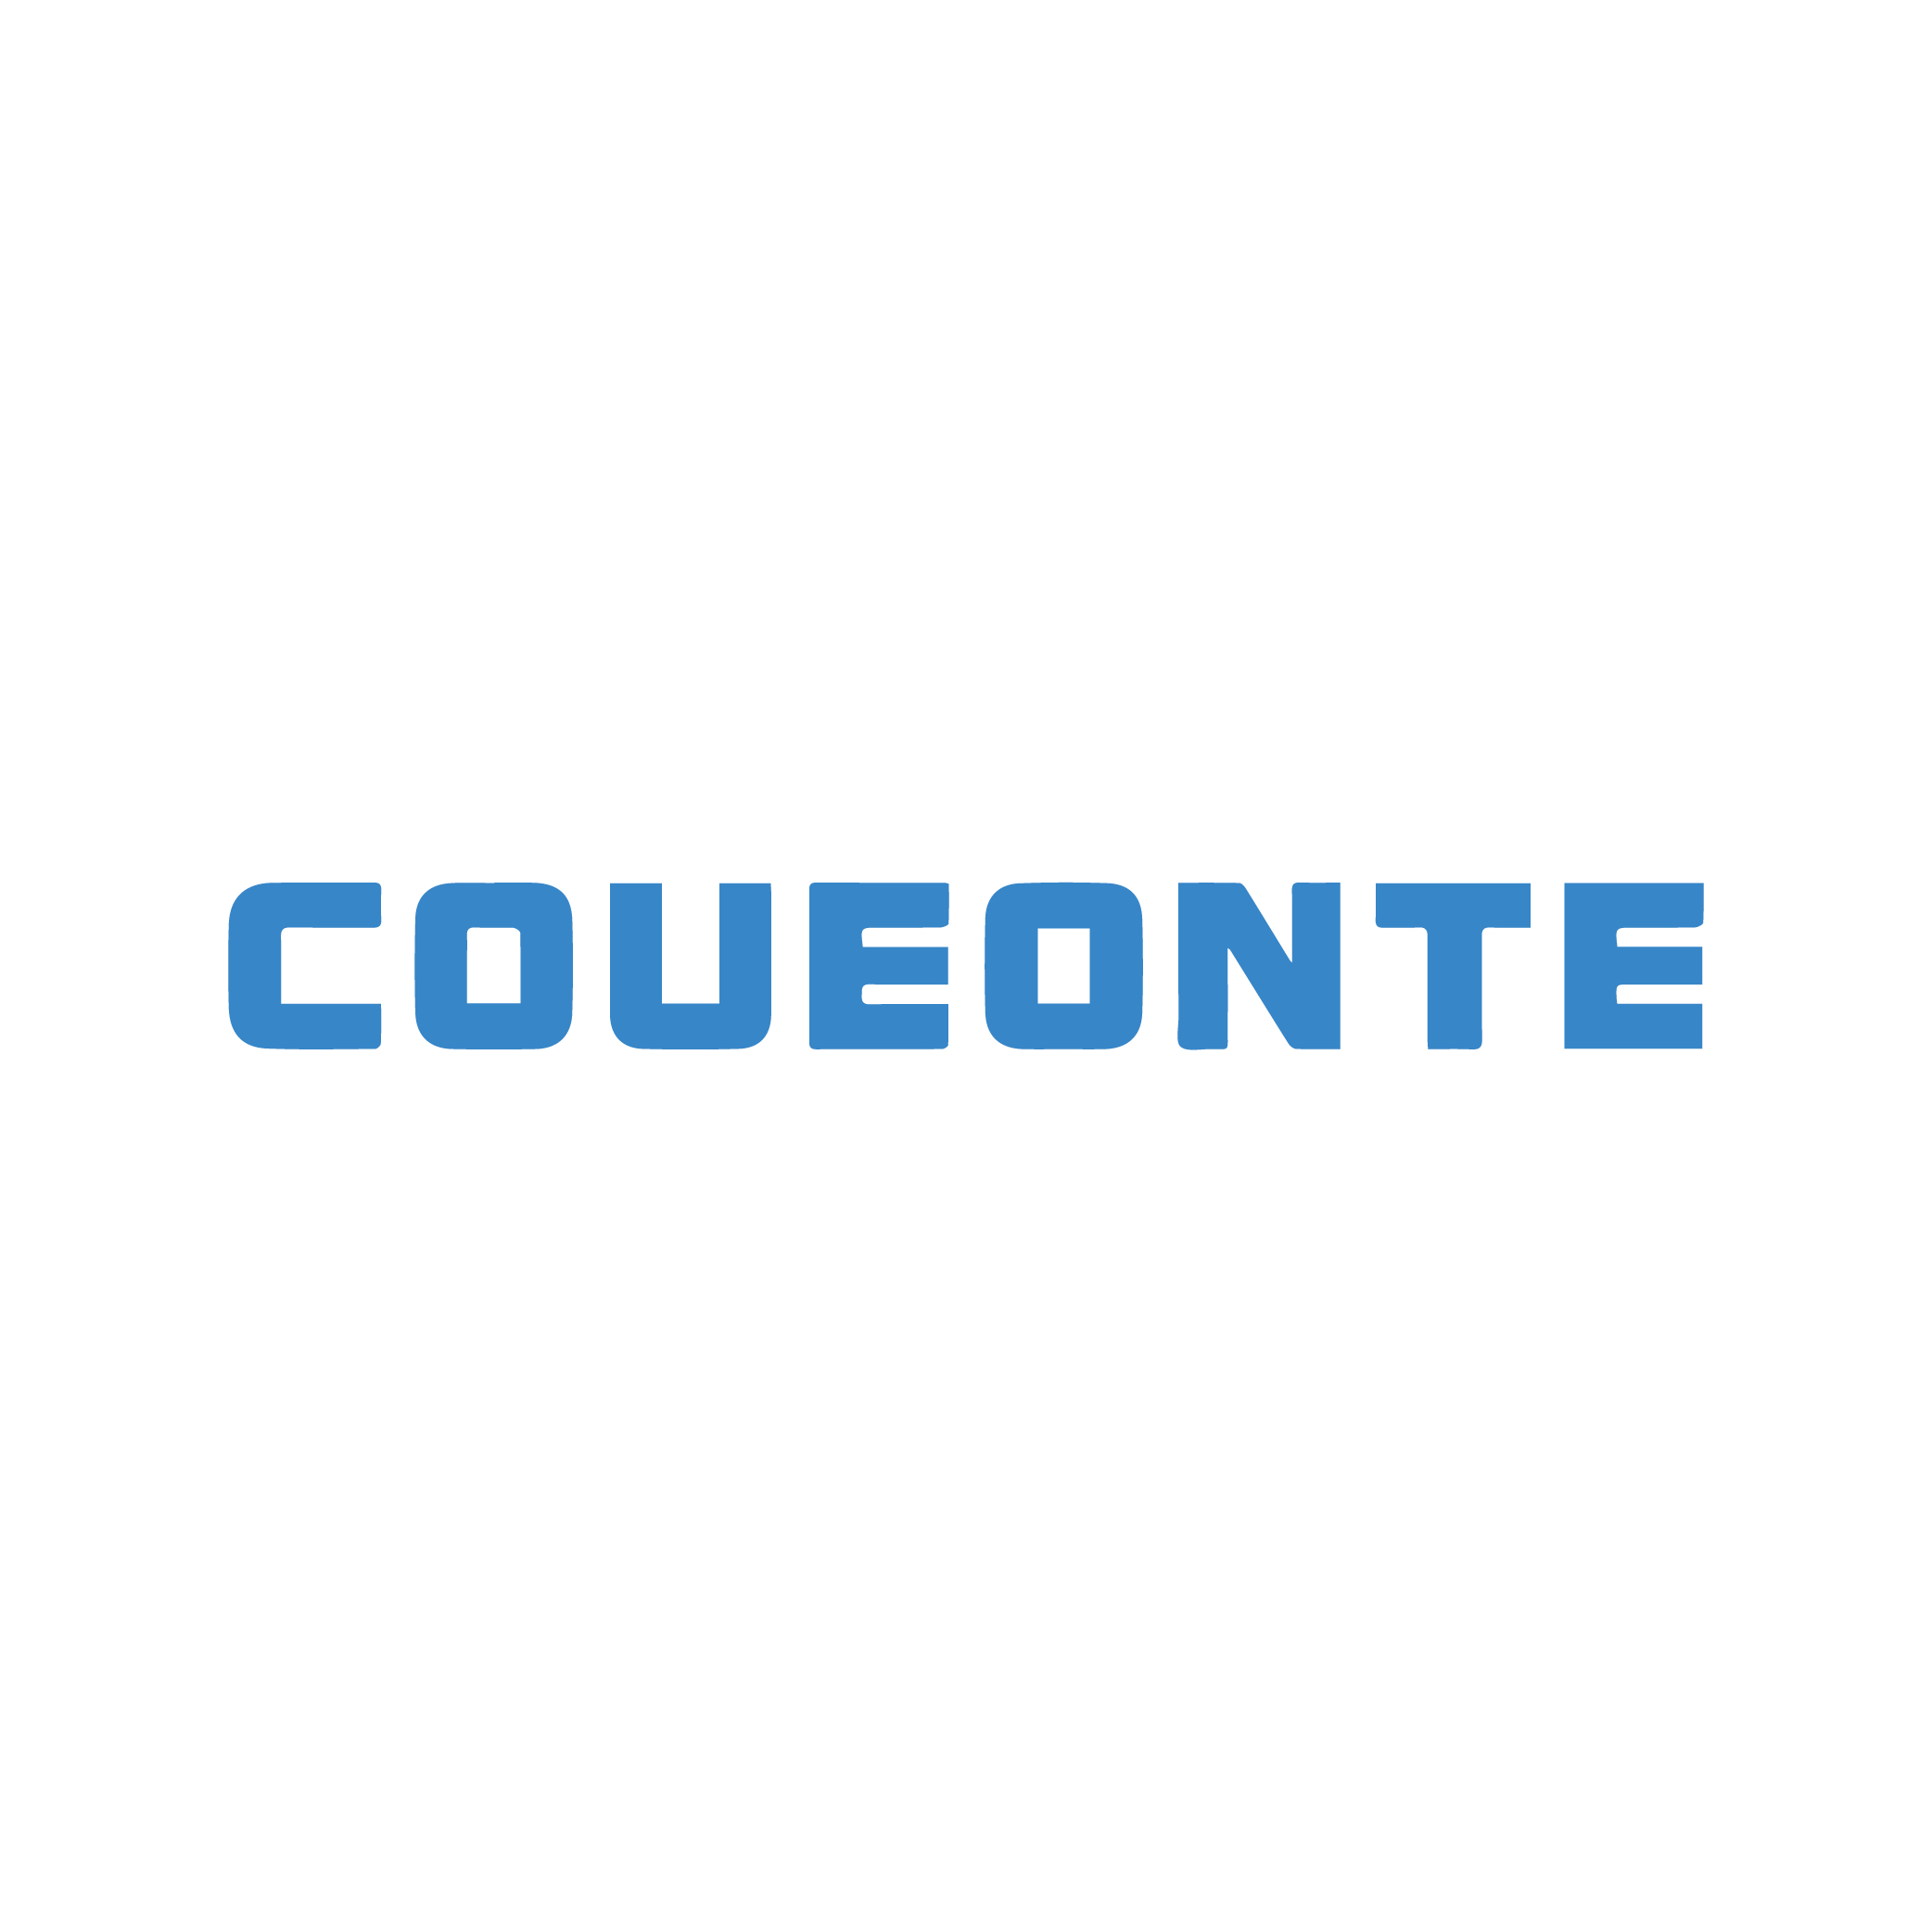 COUEONTE